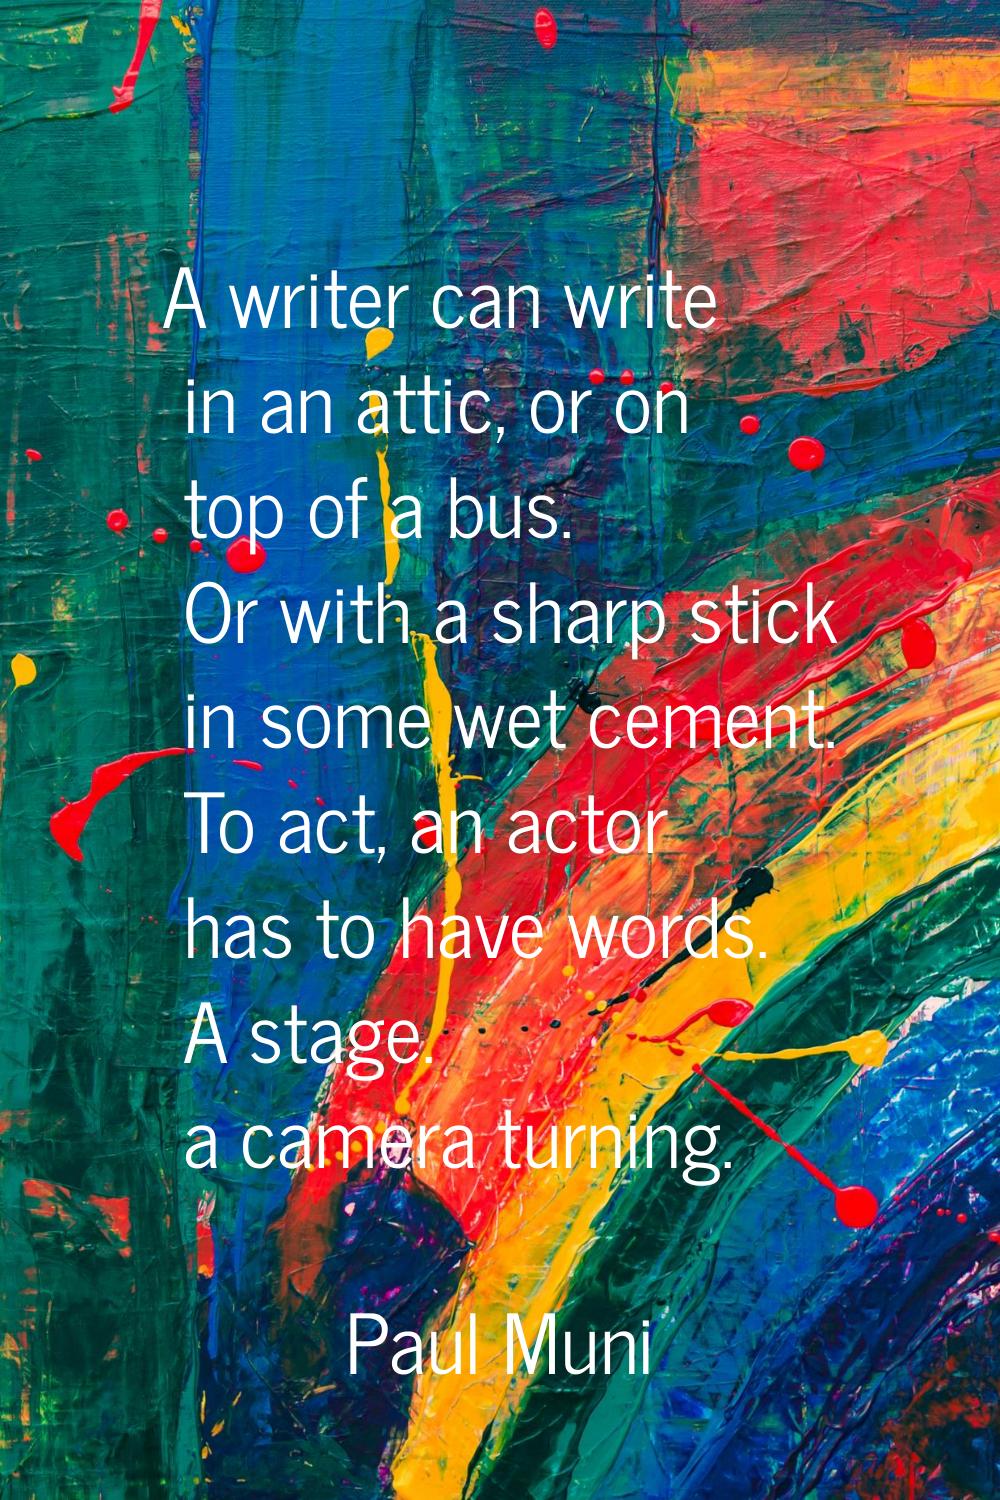 A writer can write in an attic, or on top of a bus. Or with a sharp stick in some wet cement. To ac